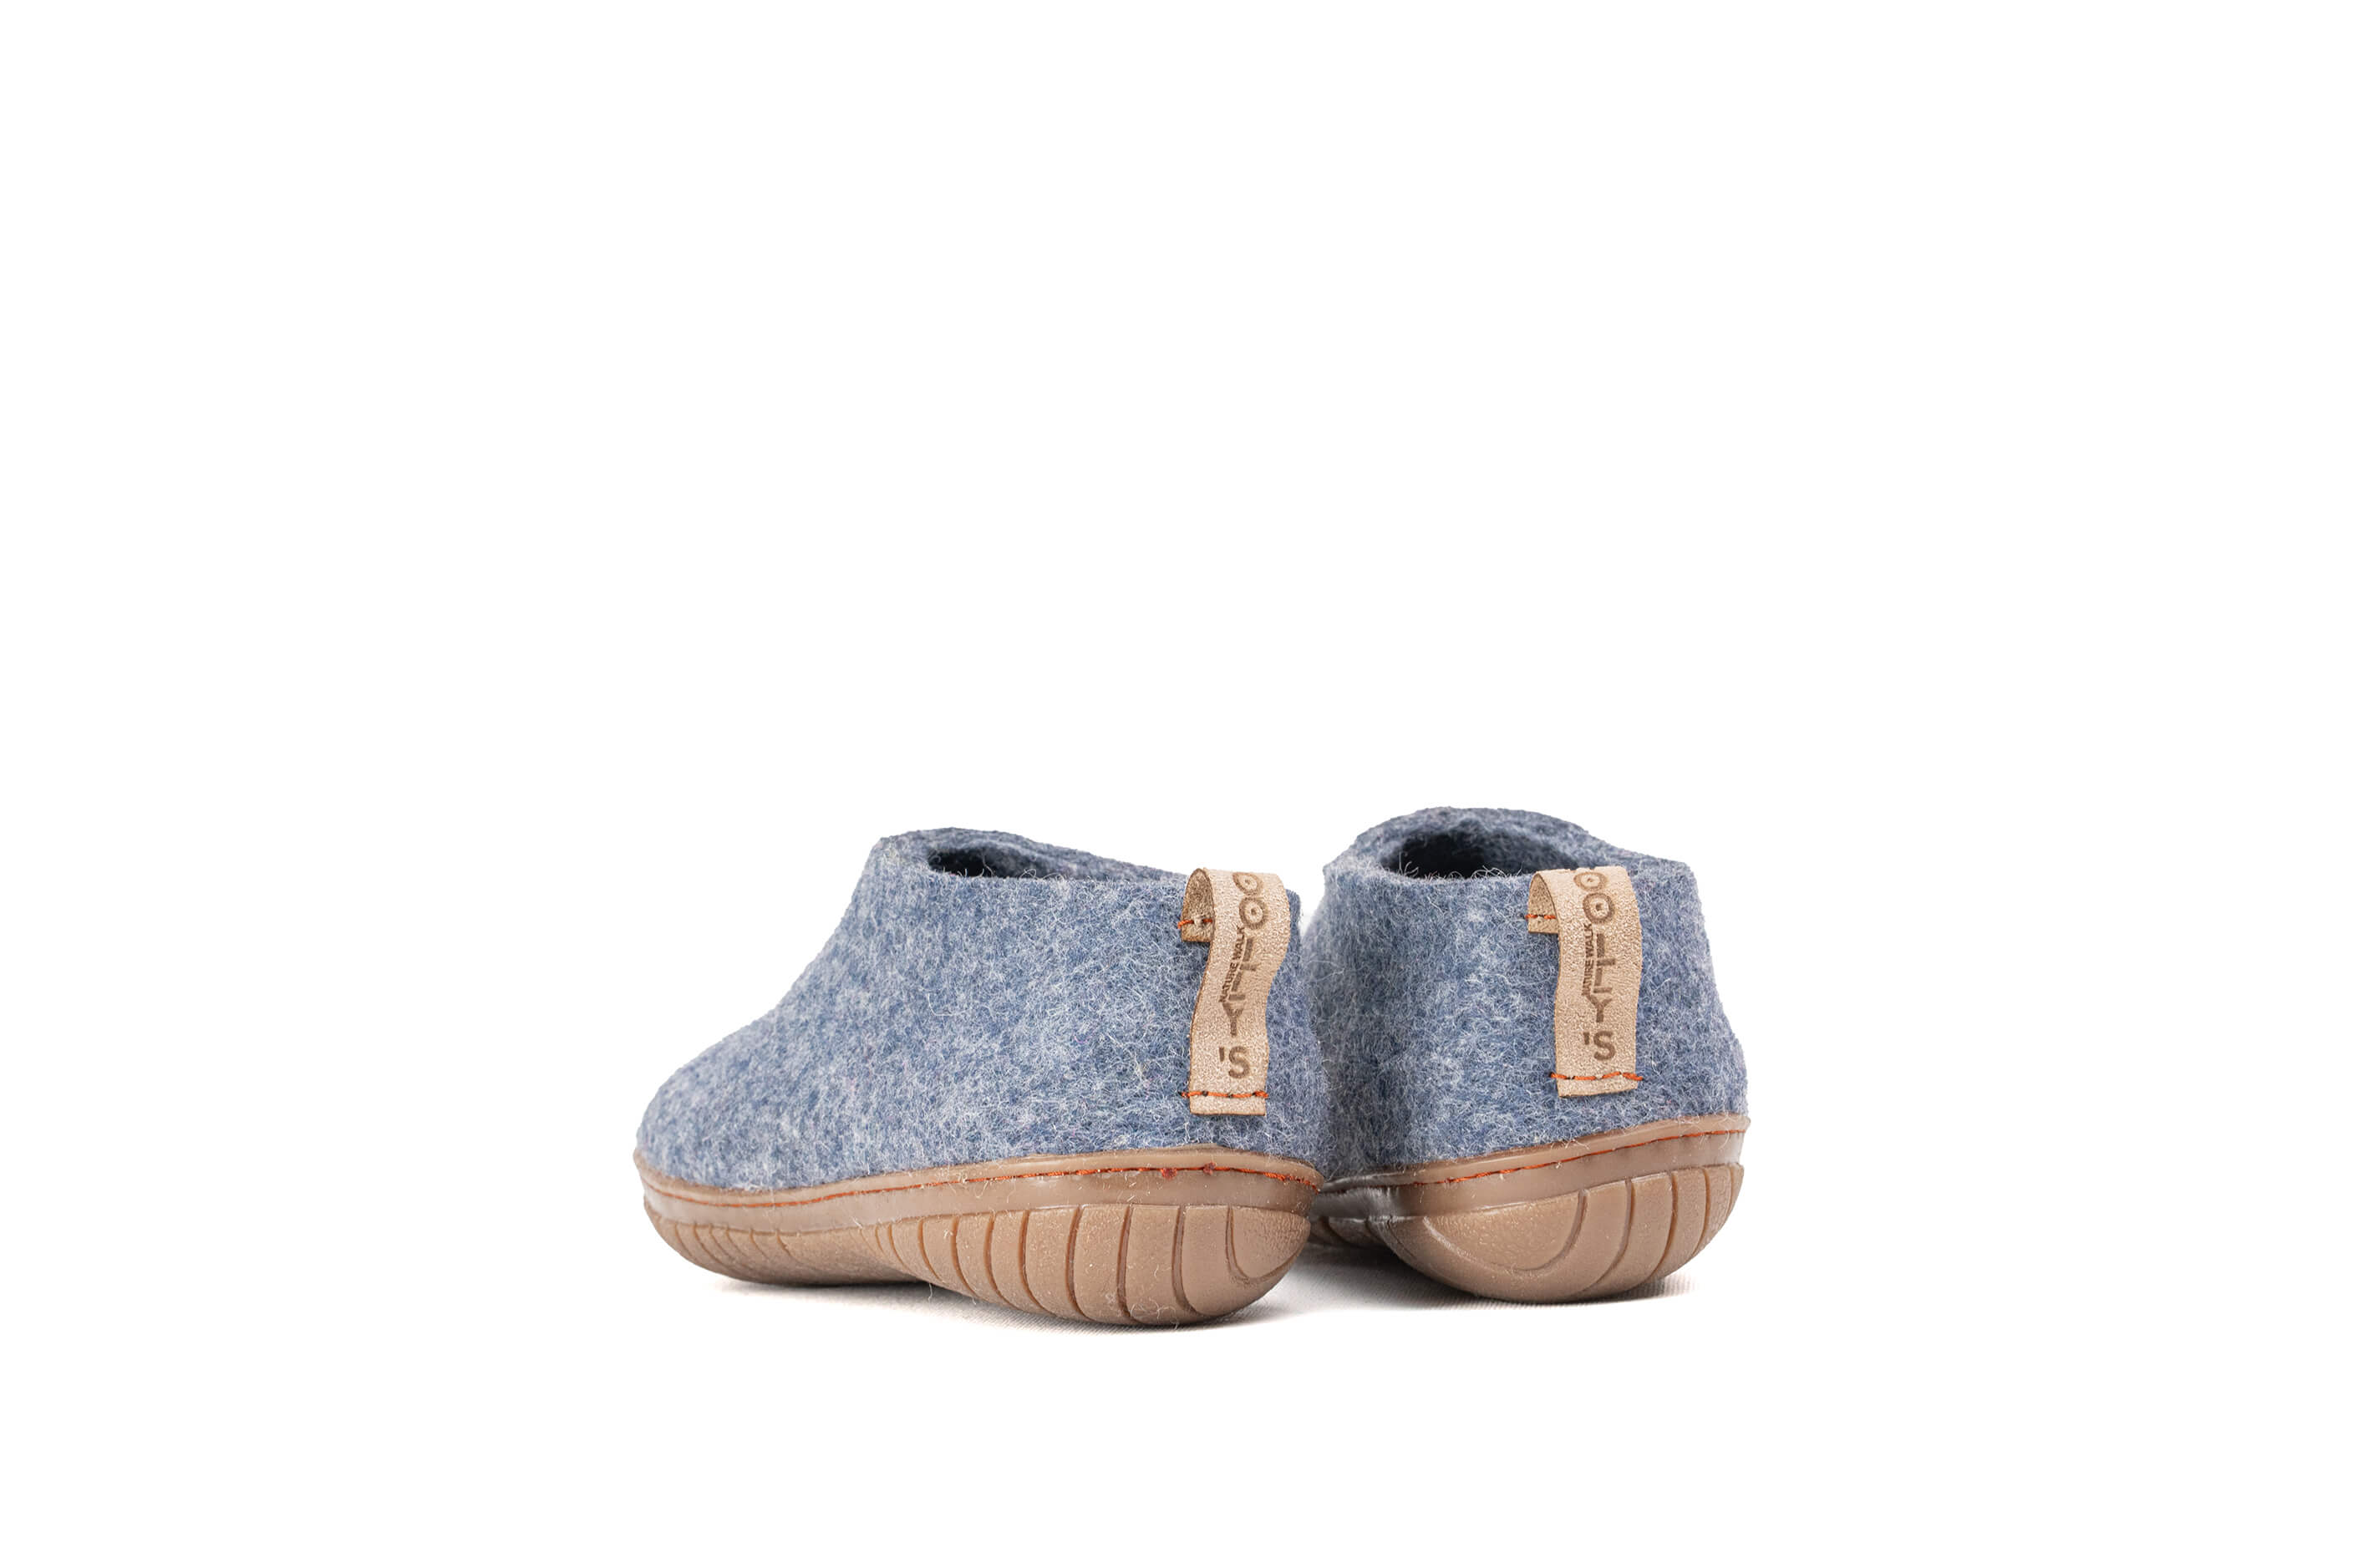 Outdoor Boiled Felt Shoes With Rubber Sole - Denim